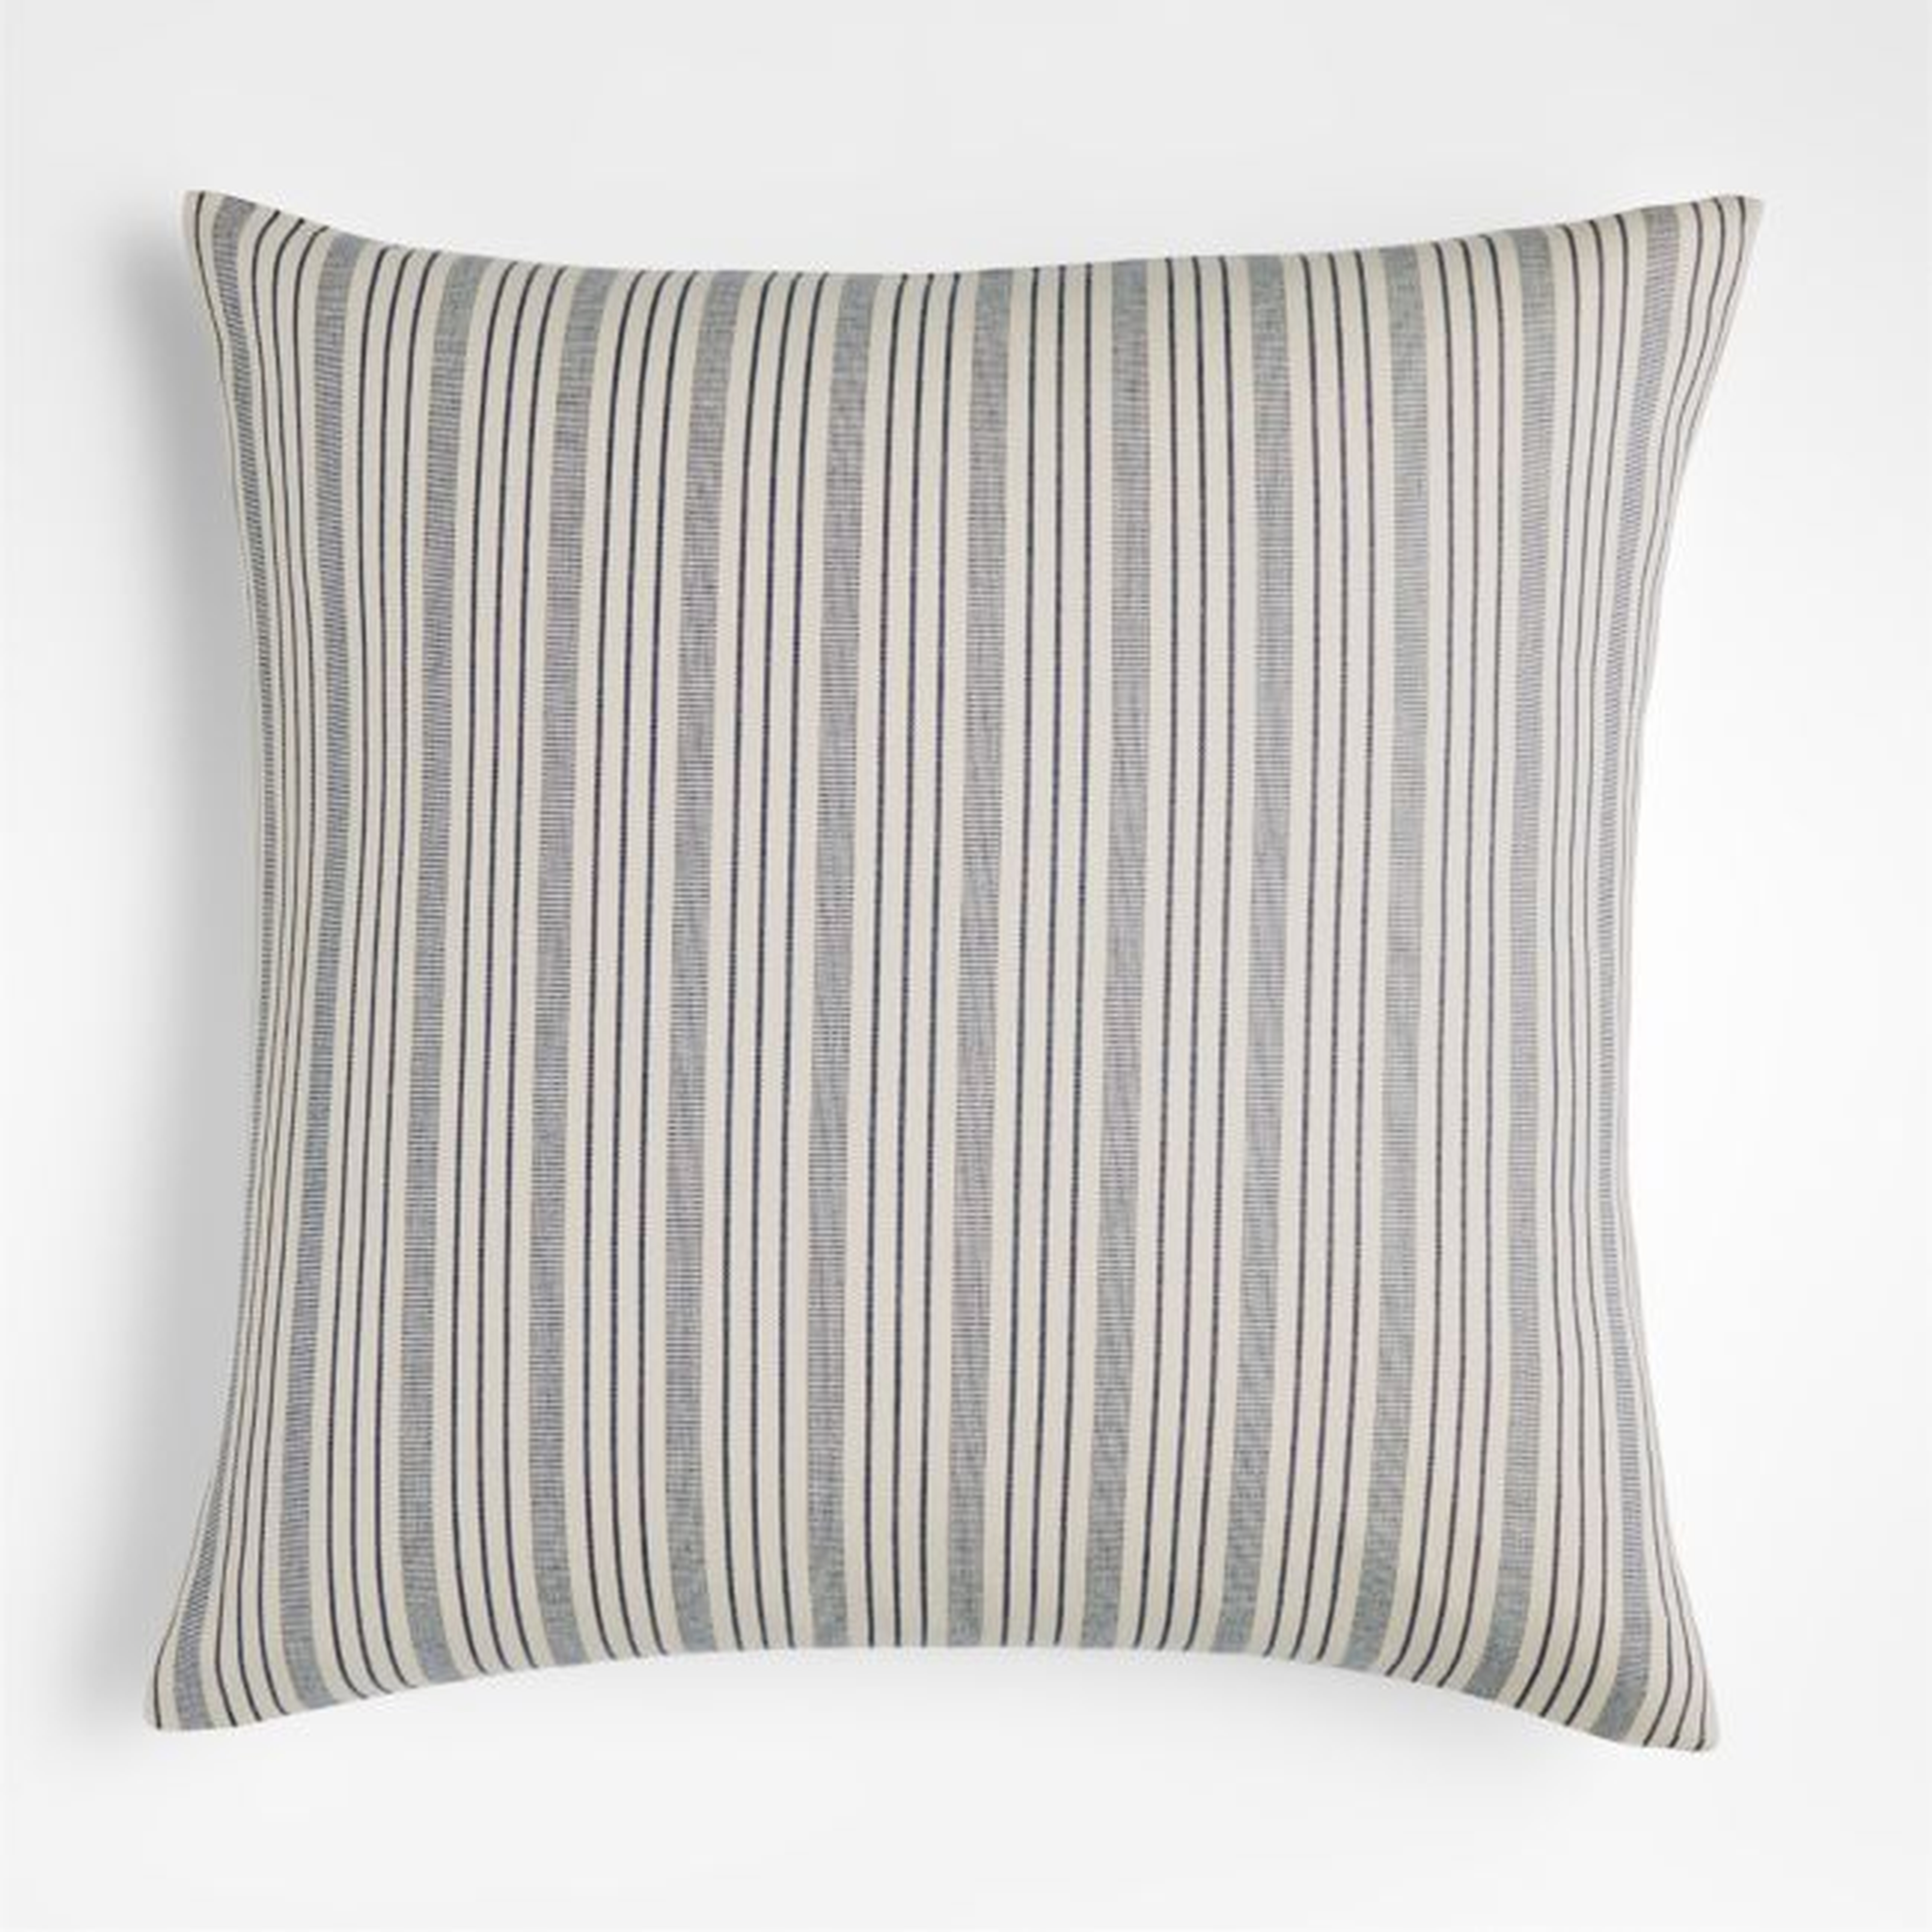 Sabine 23" Blue Striped Pillow Cover with Feather-Down Insert - Crate and Barrel